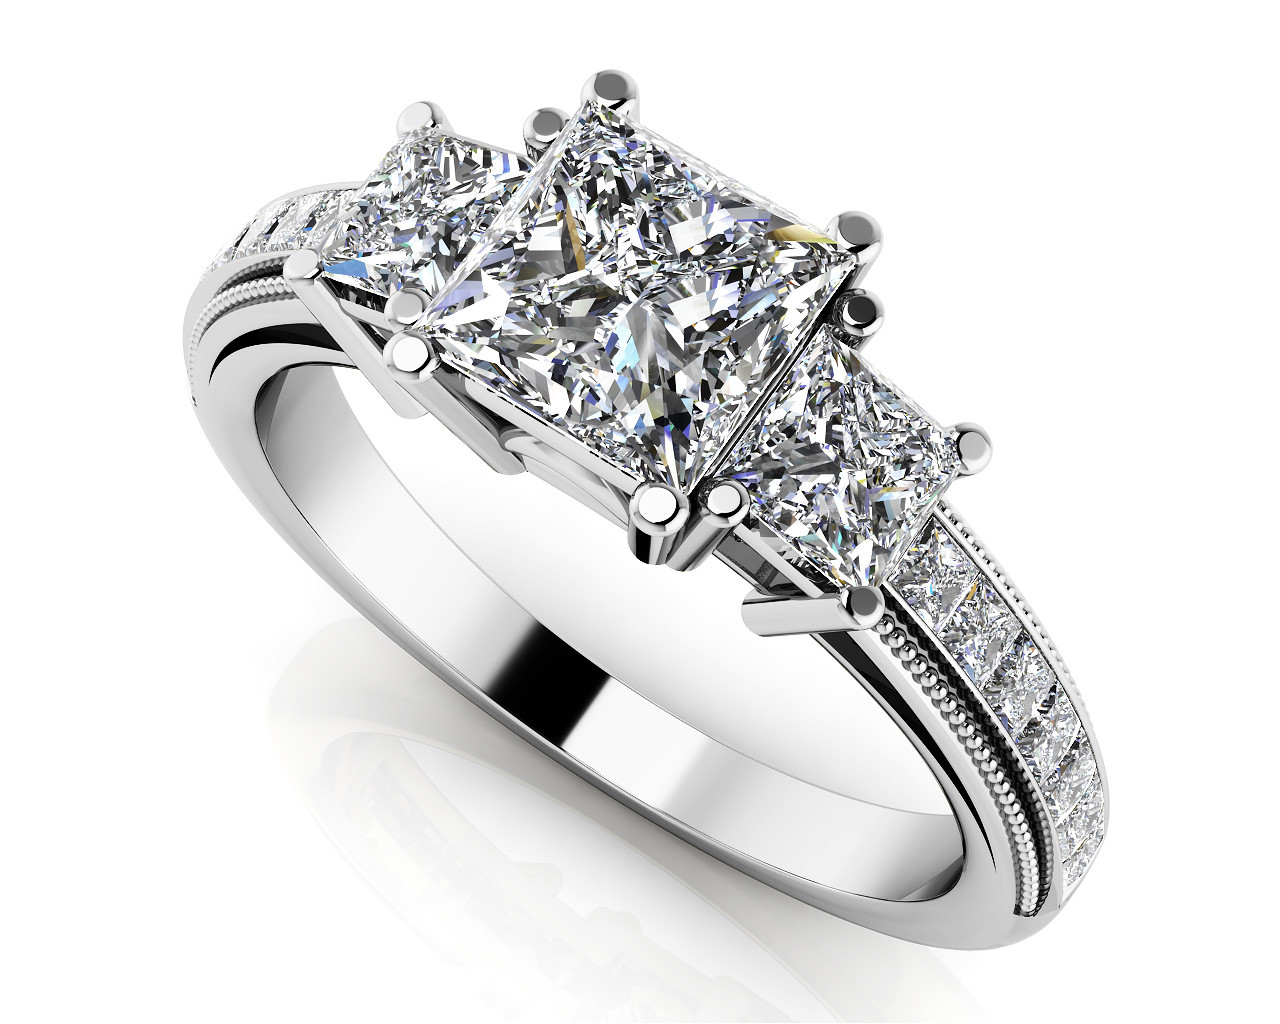 Princes Cut Wedding Rings
 Dazzling Princess Cut Engagement Ring Roco s Jewelry